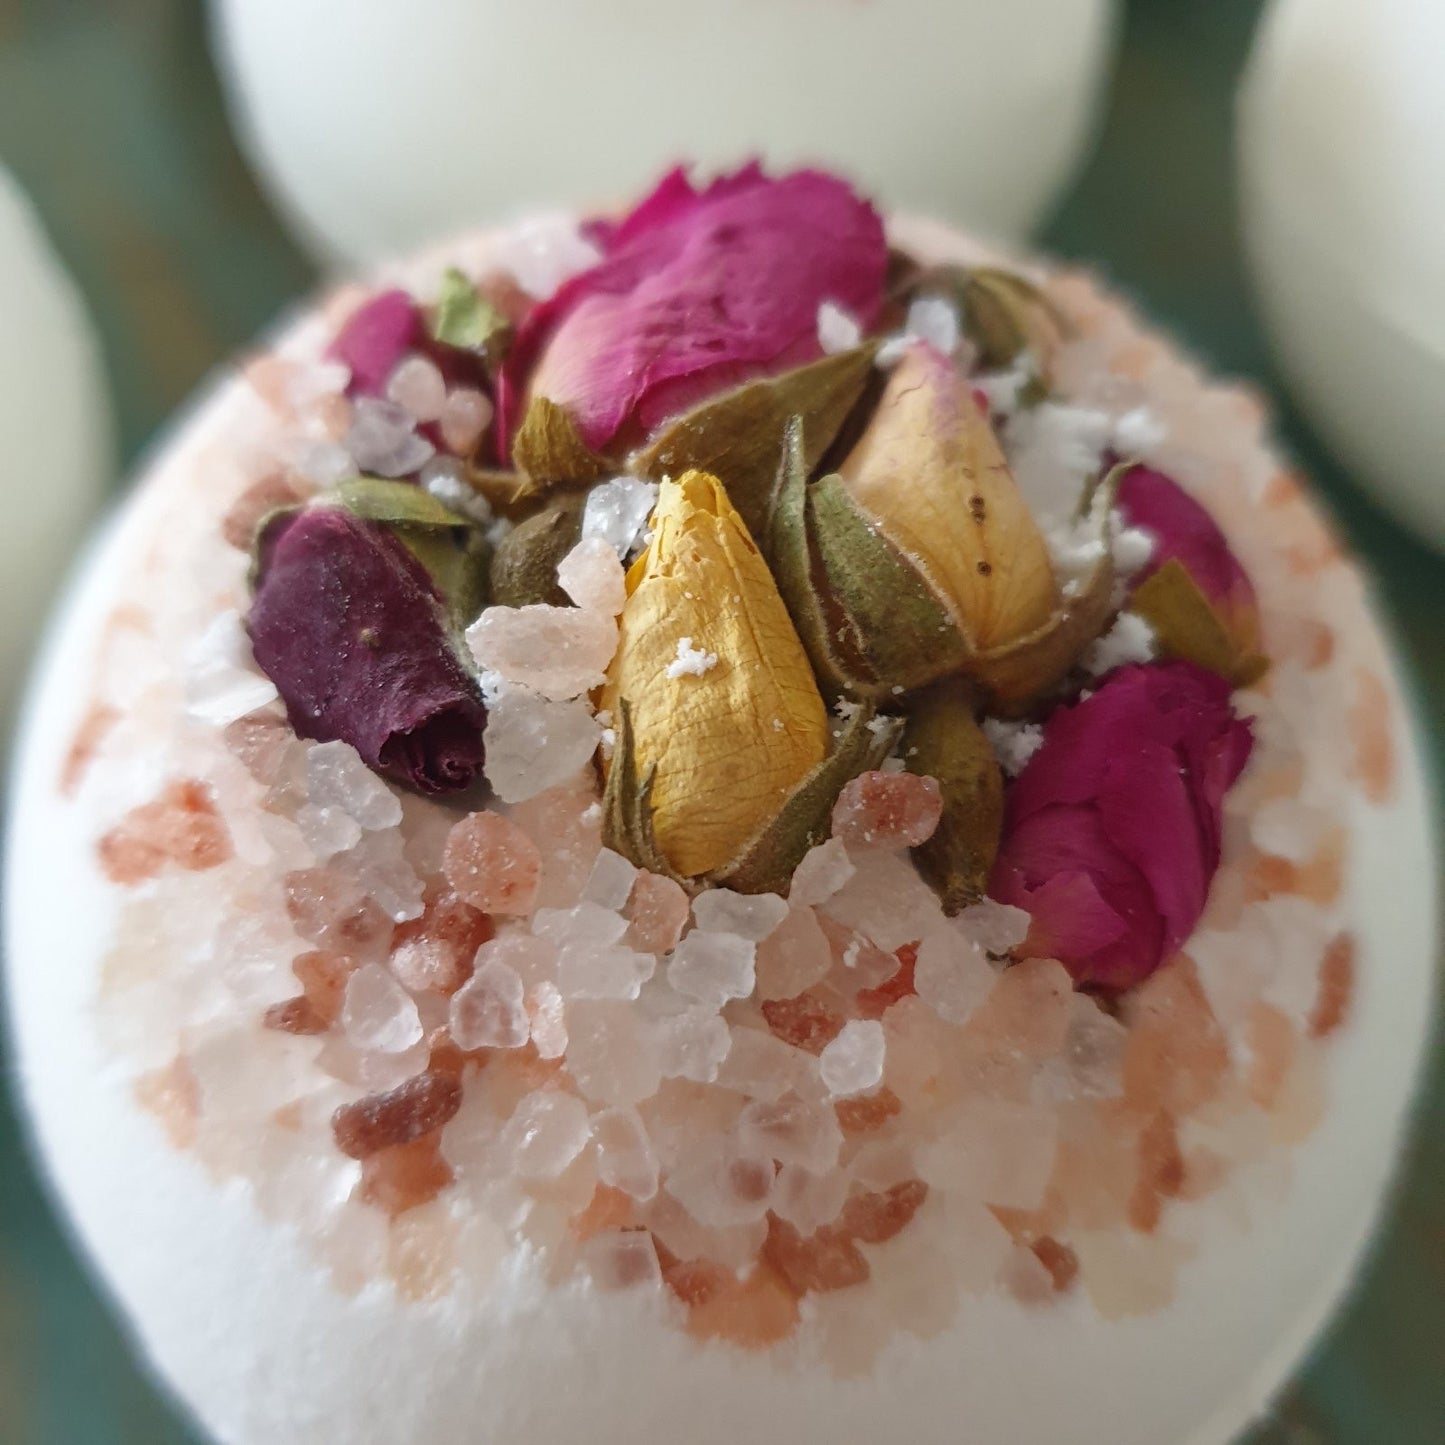 A close up photograph of the Blossom Secret Bath Bomb, showcasing its natural beauty with dried flower petals and organic salts.